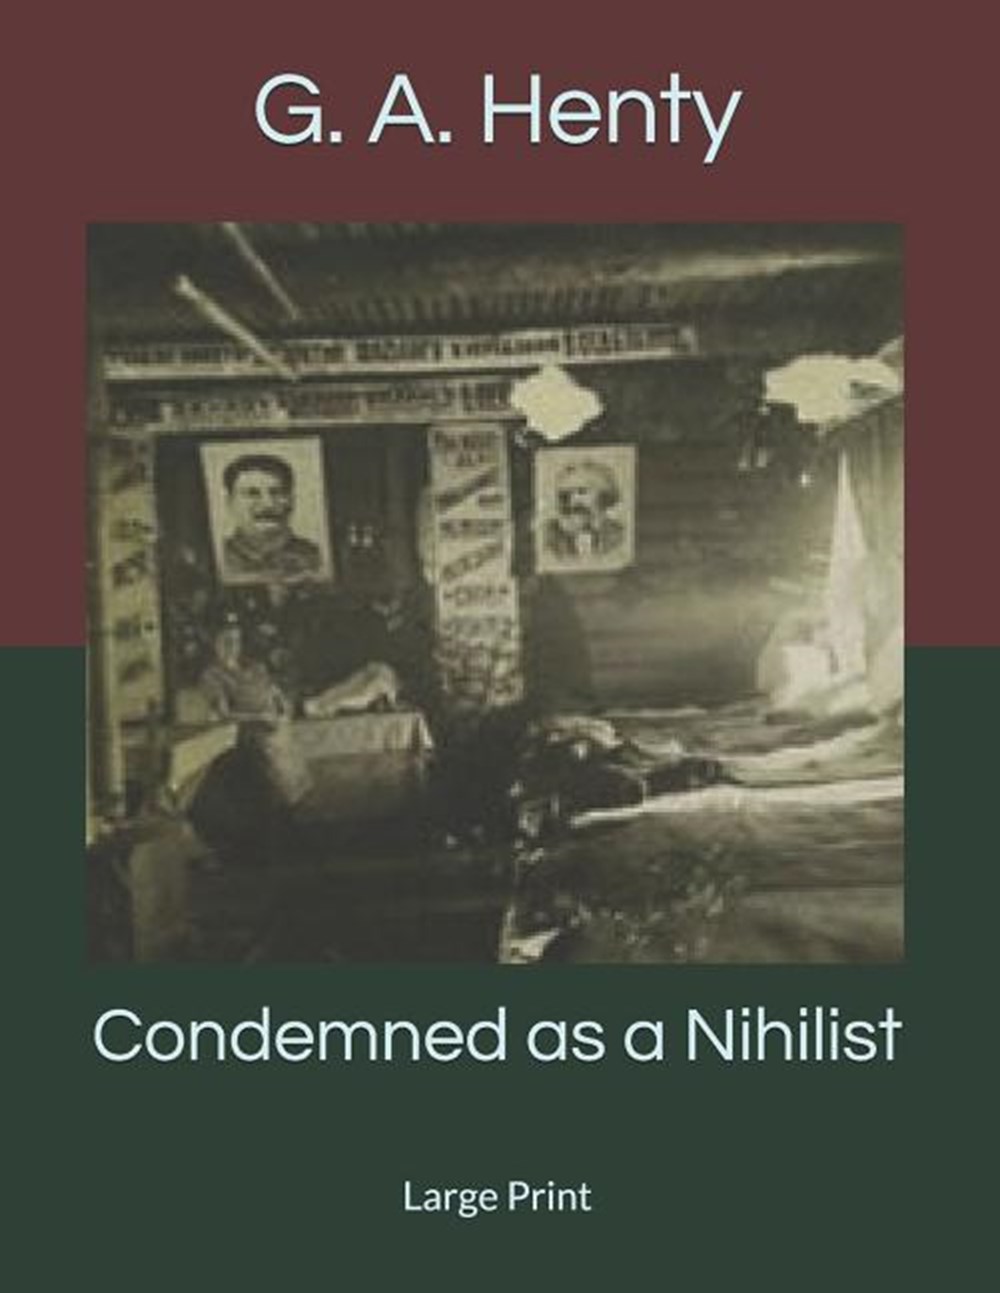 Condemned as a Nihilist: Large Print